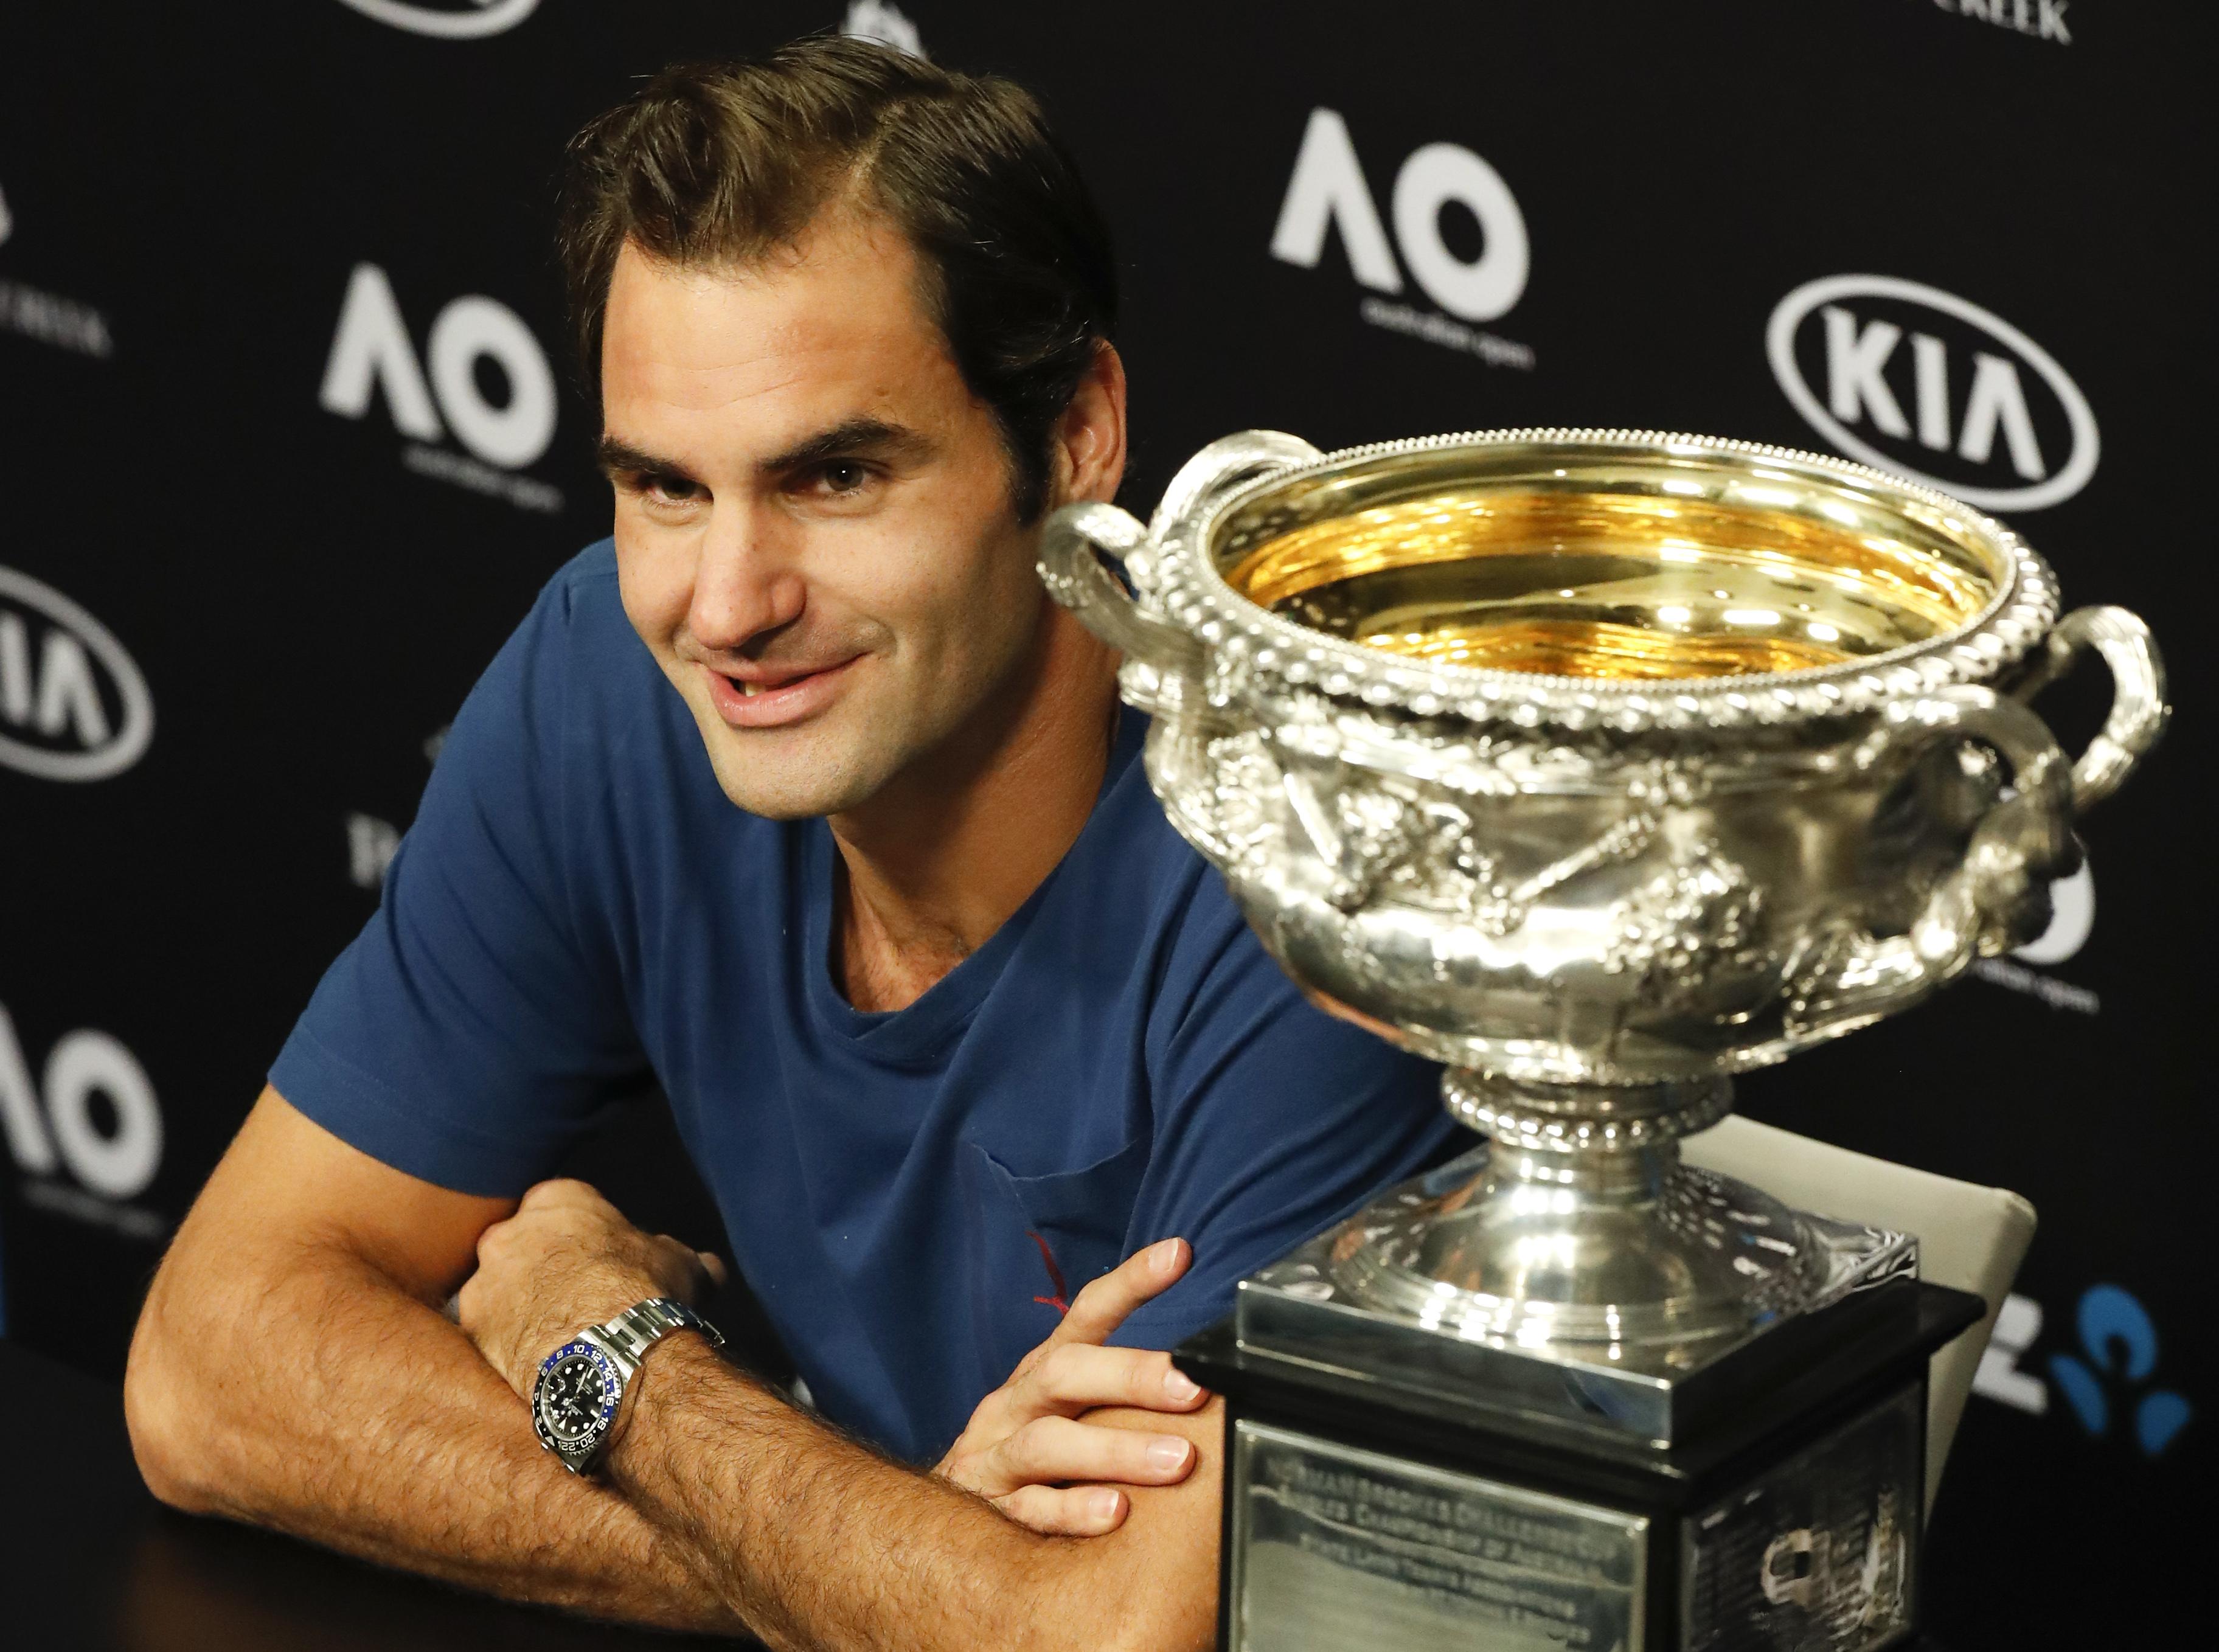 Federer beats Nadal in epic Aussie final to win 18th major | The Spokesman-Review